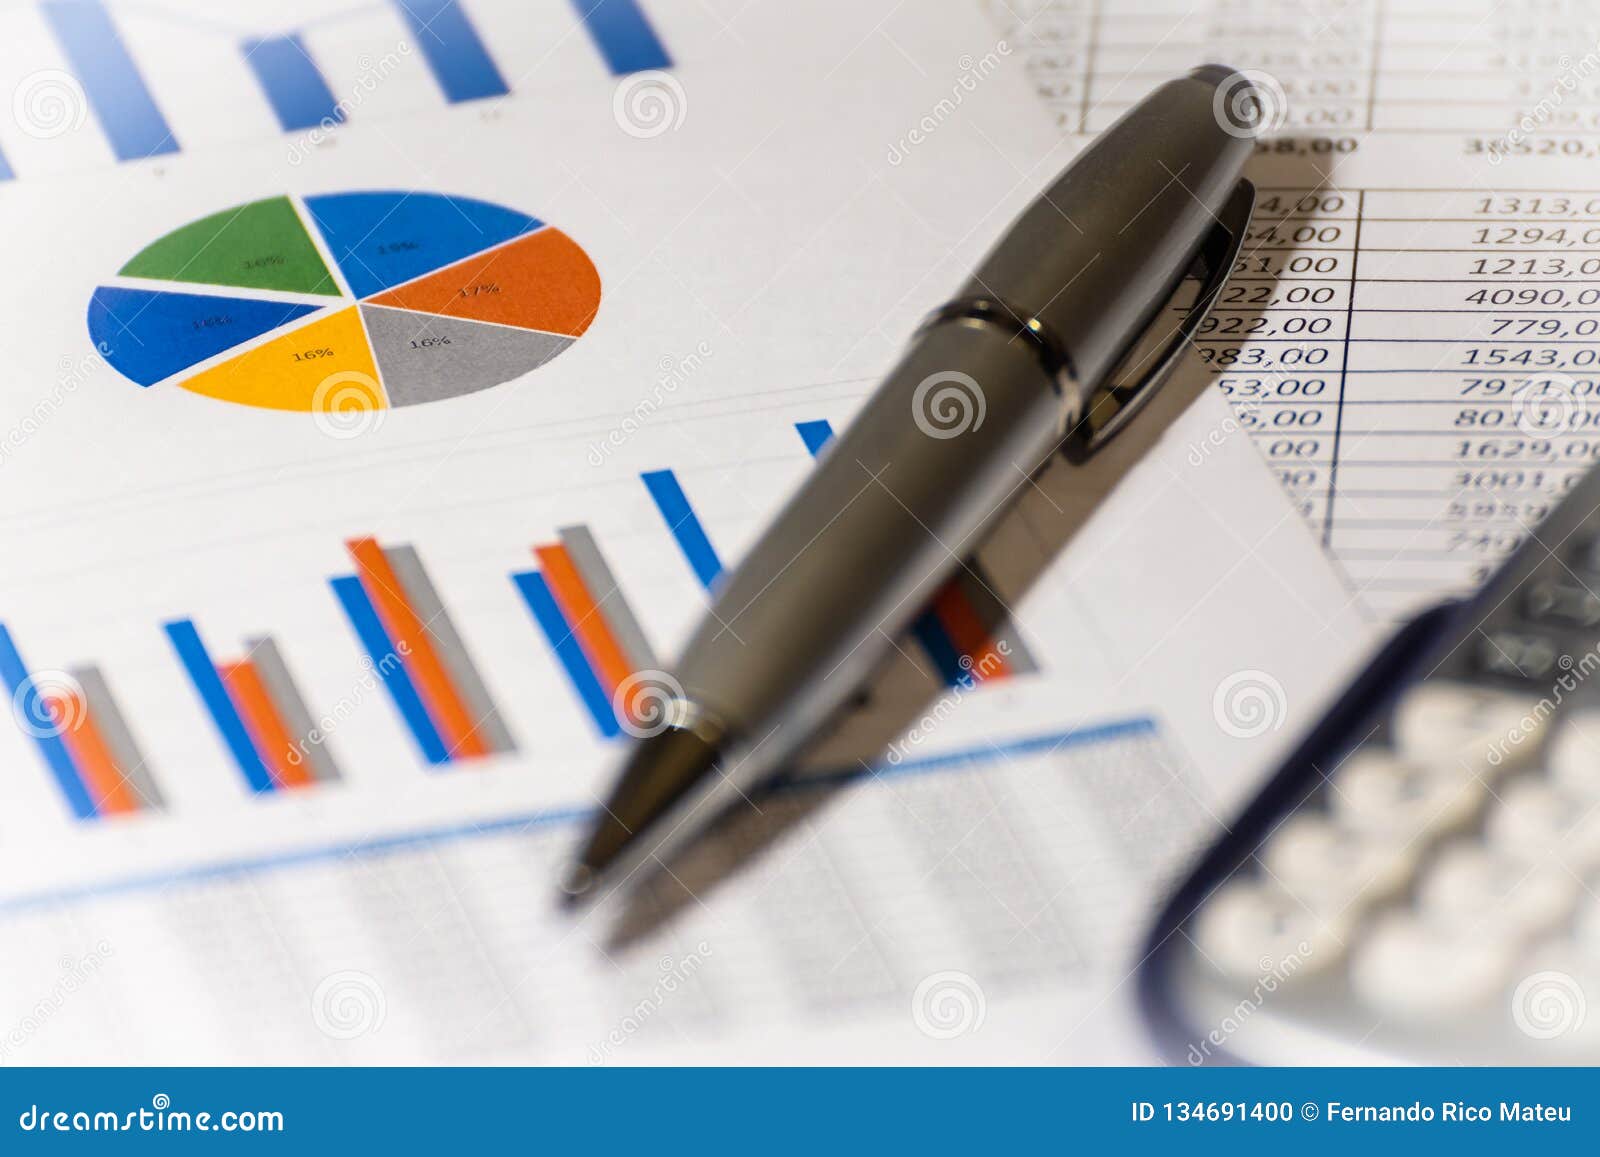 ballpoint pen, calculator and financial charts. financial reports